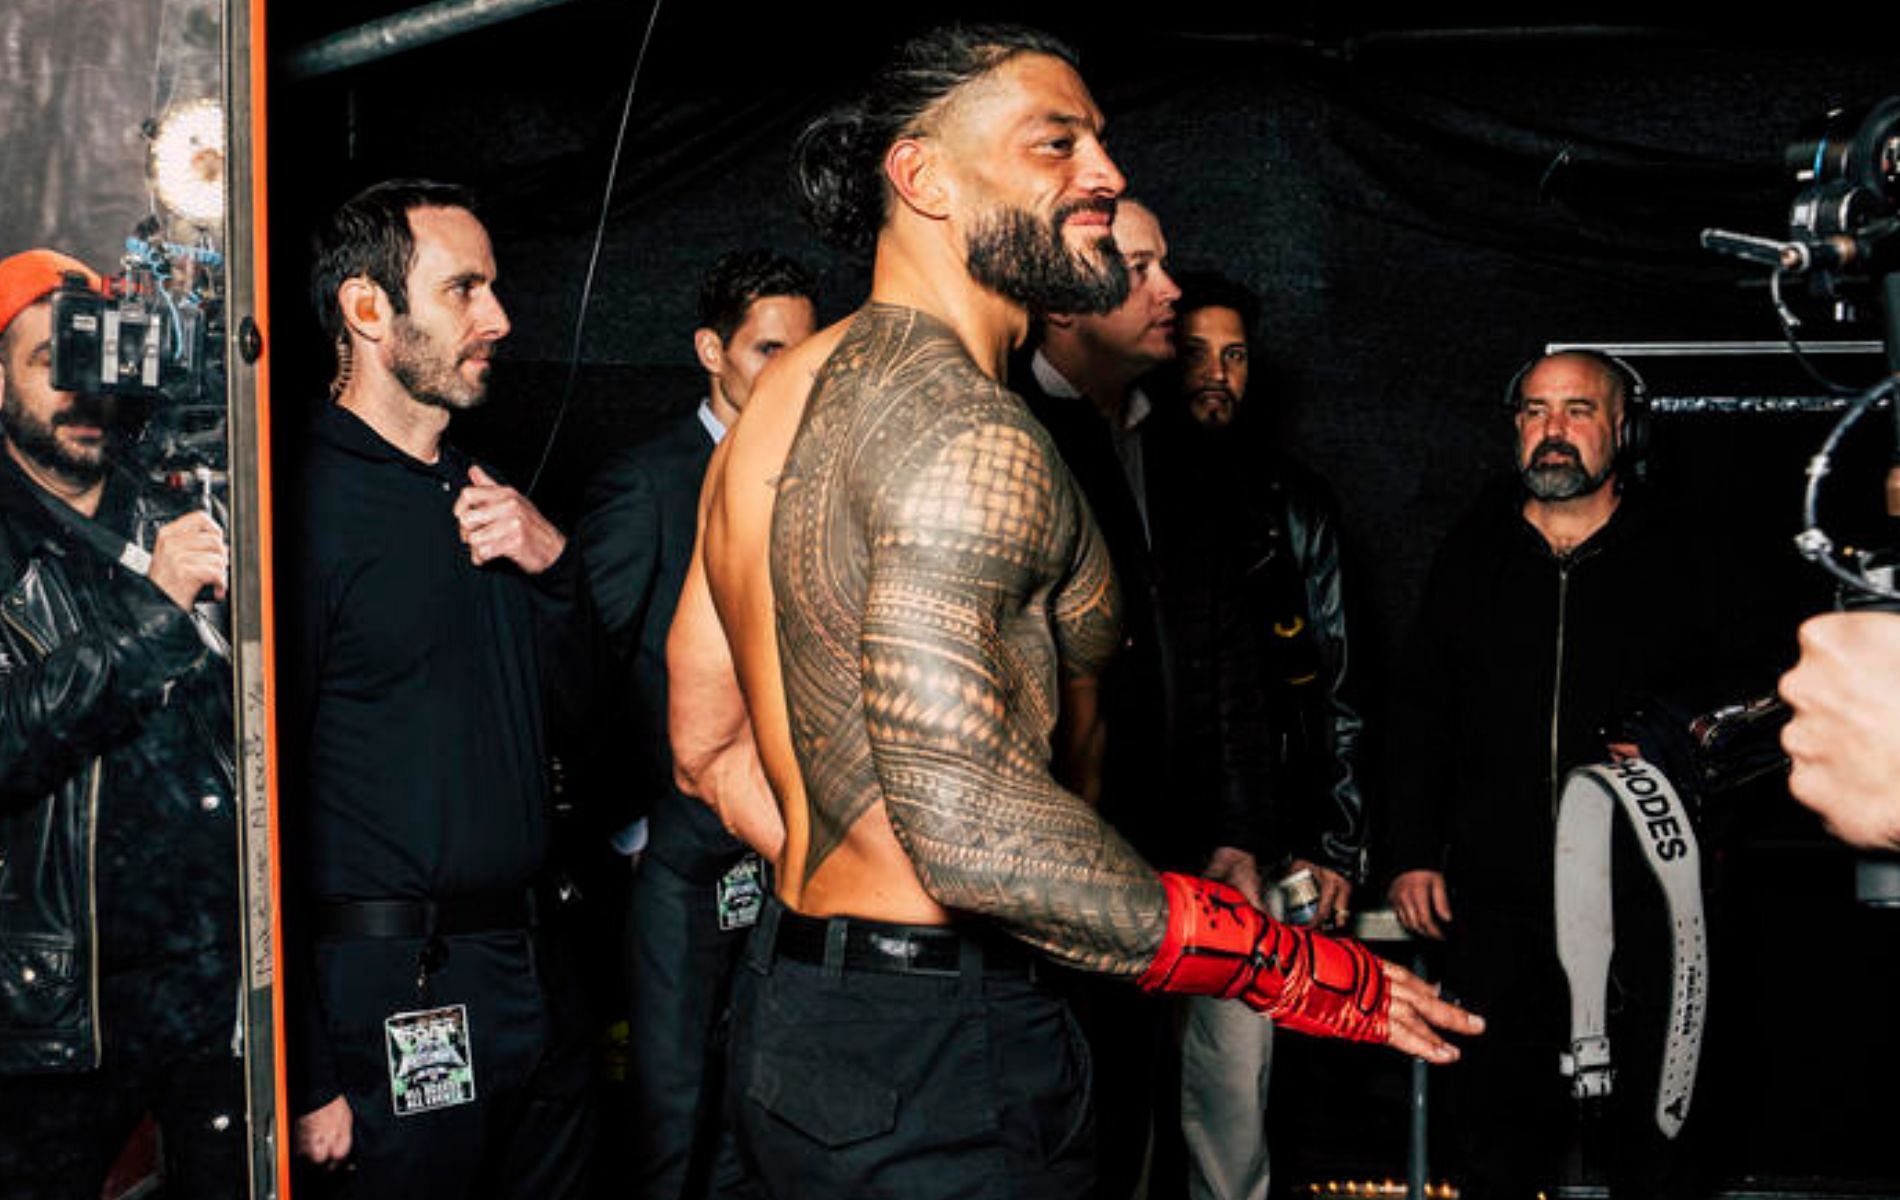 Roman Reigns backstage at WrestleMania 40.